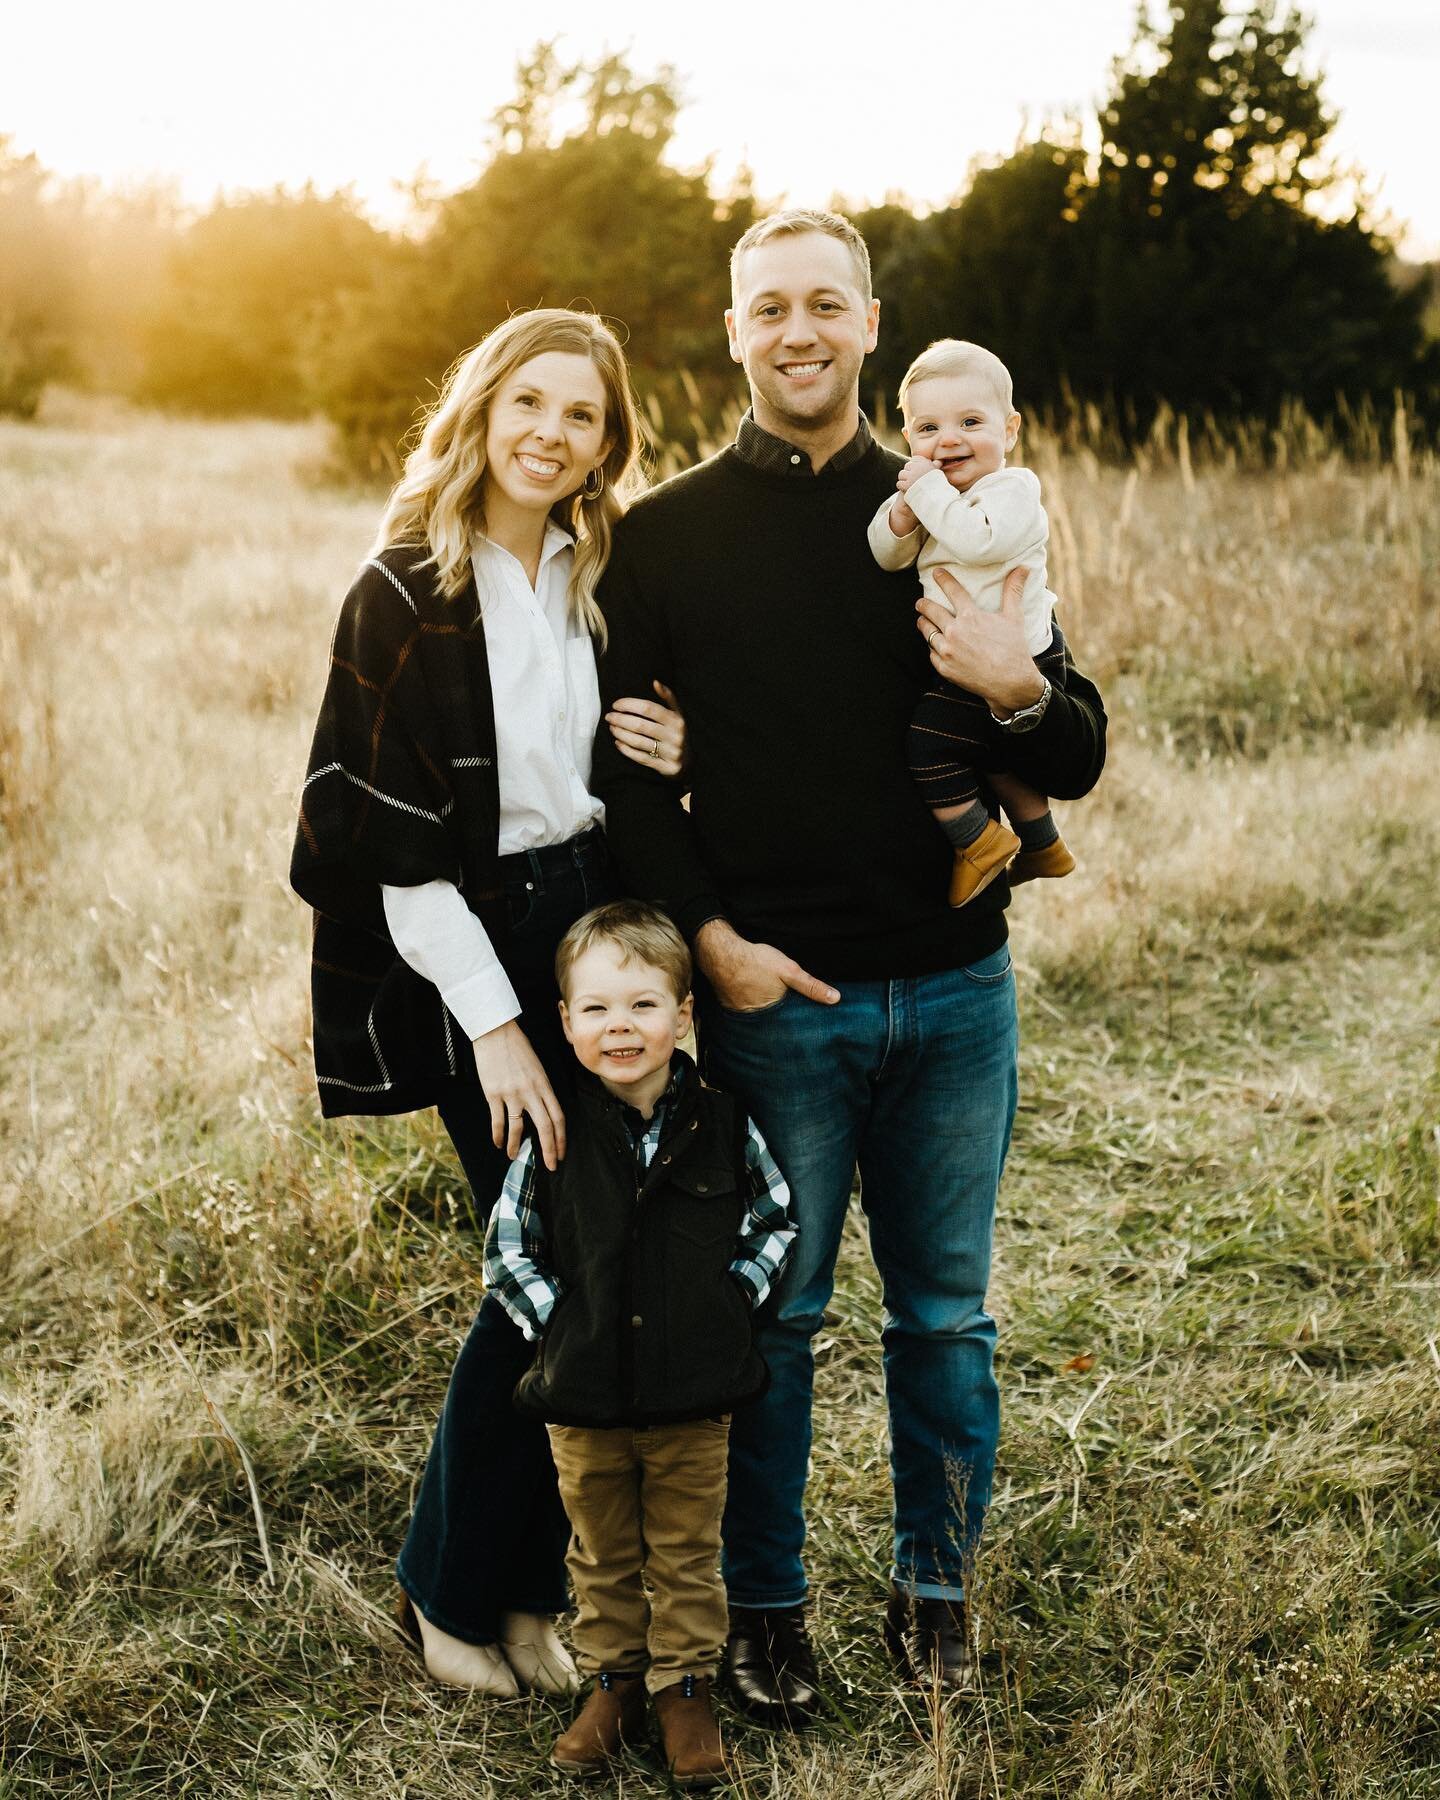 Back from Thanksgiving break with a lot to be thankful for. Ready to finish the year strong! 🍂🍁

This sweet family absolutely crushed their session!